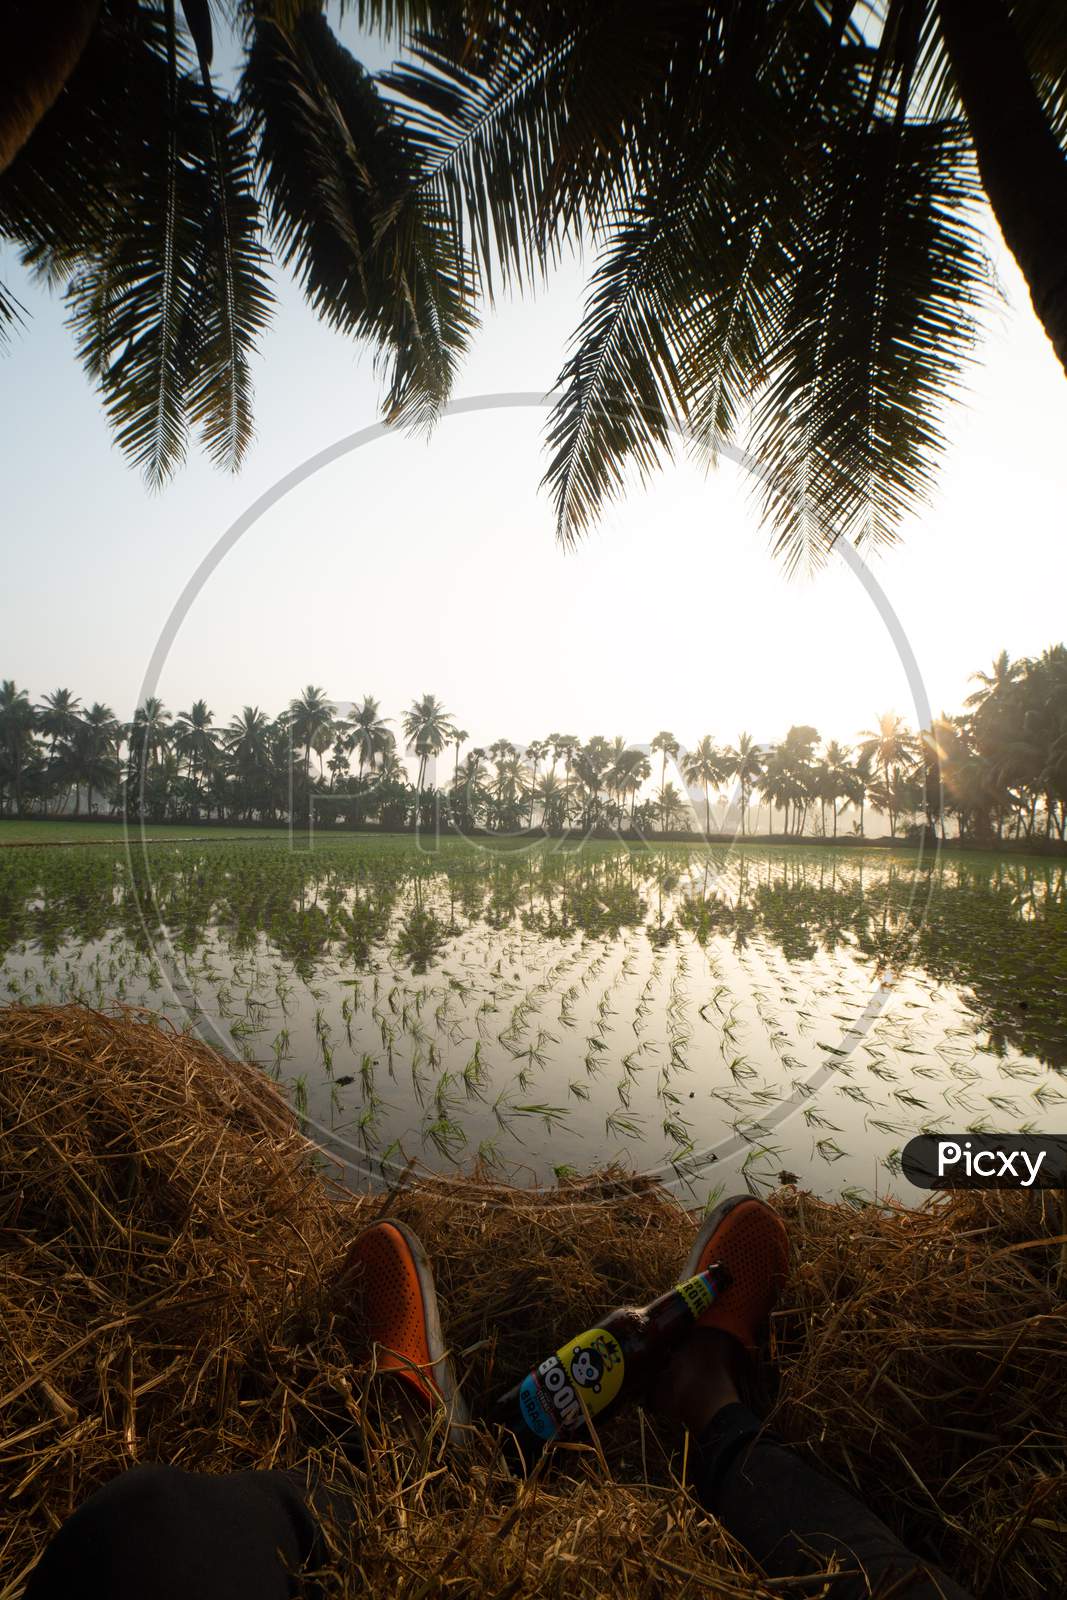 Young Green Paddy Fields With Reflection  Of Coconut Tree  At a Rural Village Outskirts